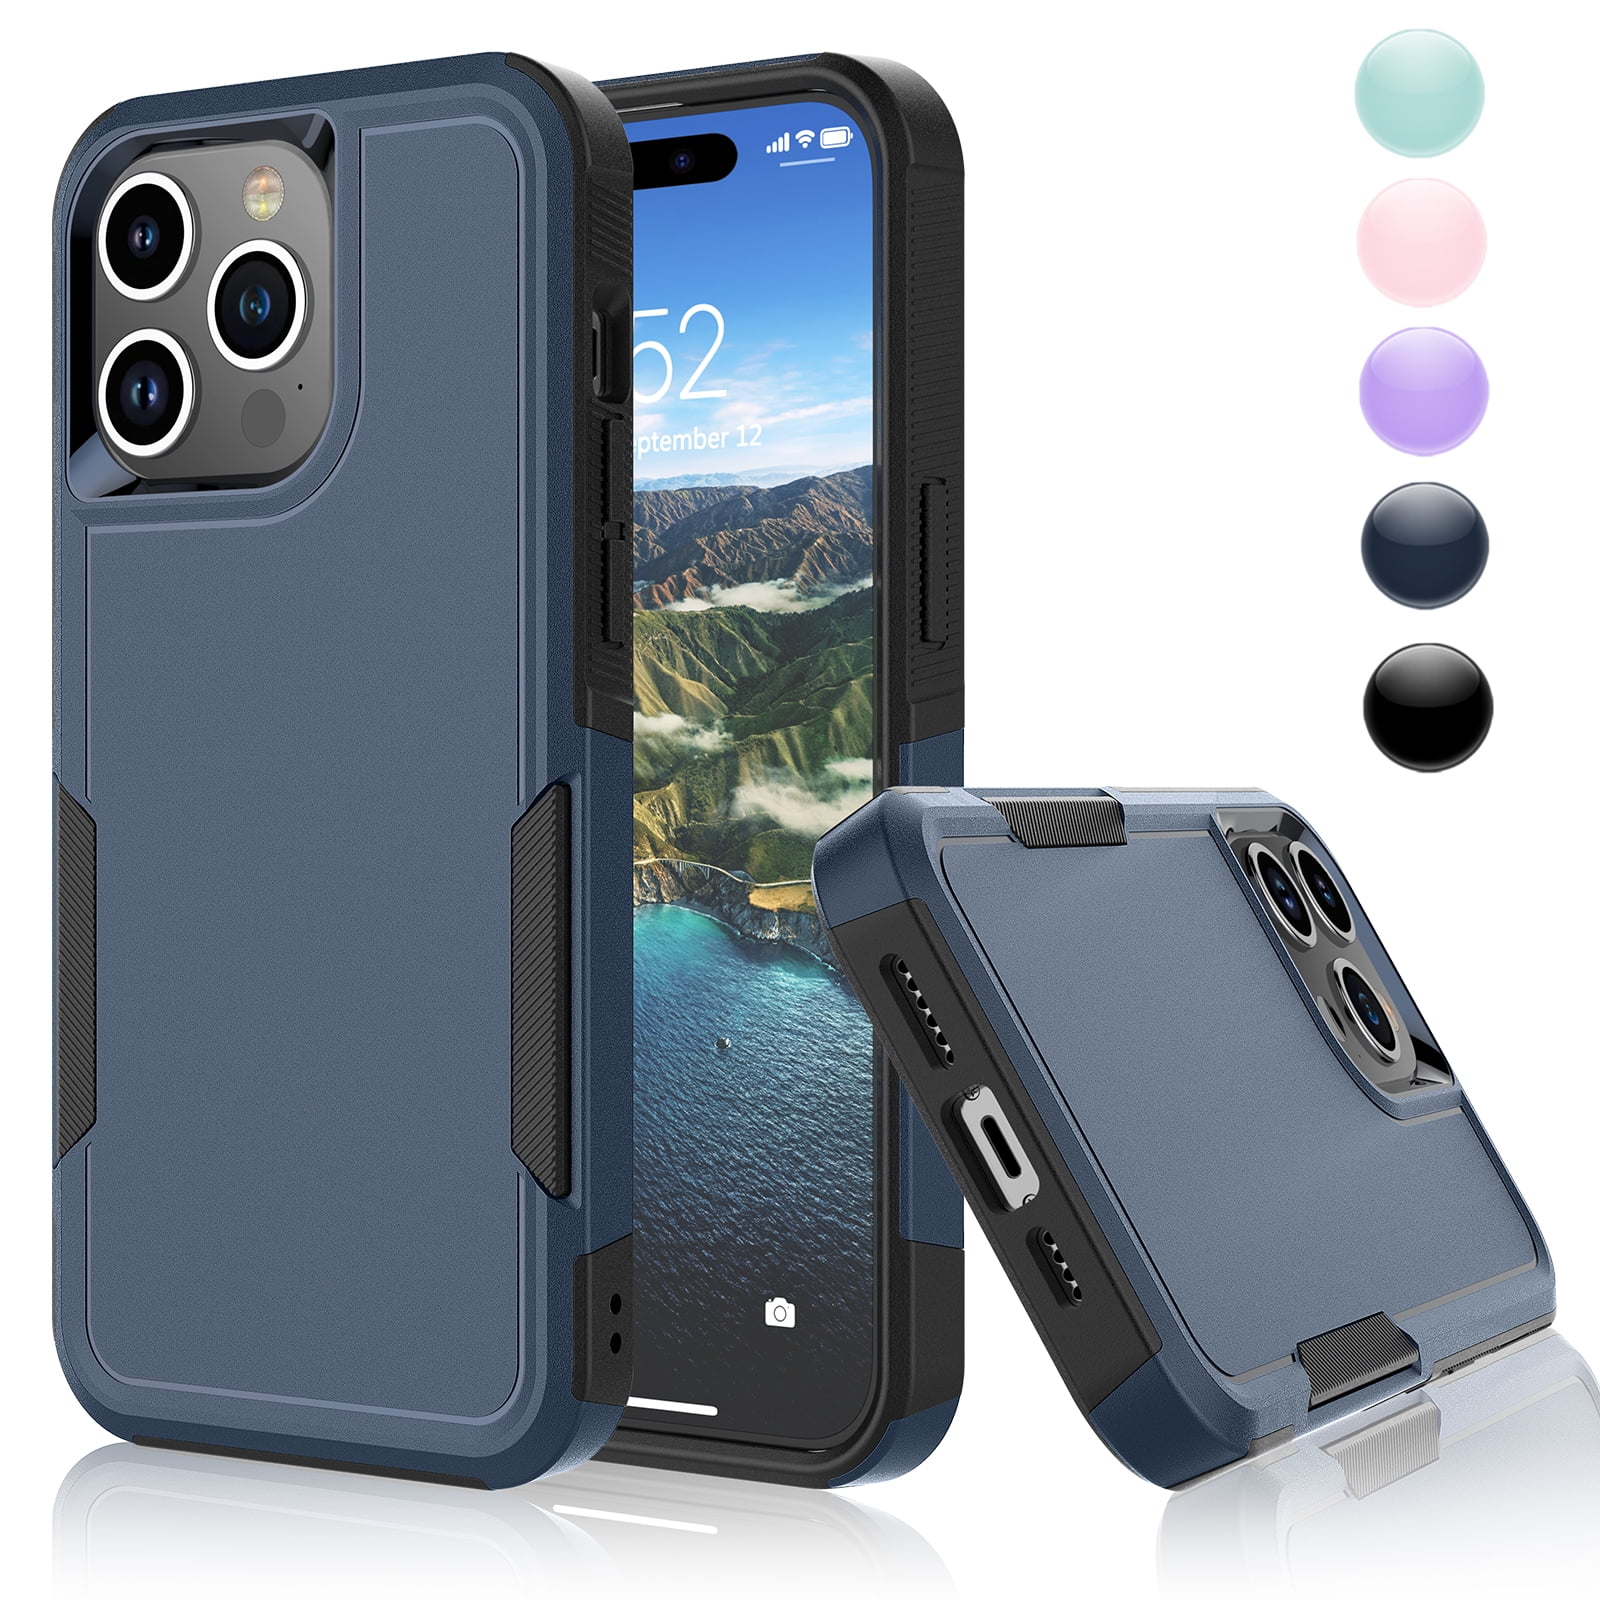  MXX iPhone 8 Plus Heavy Duty Protective Case with